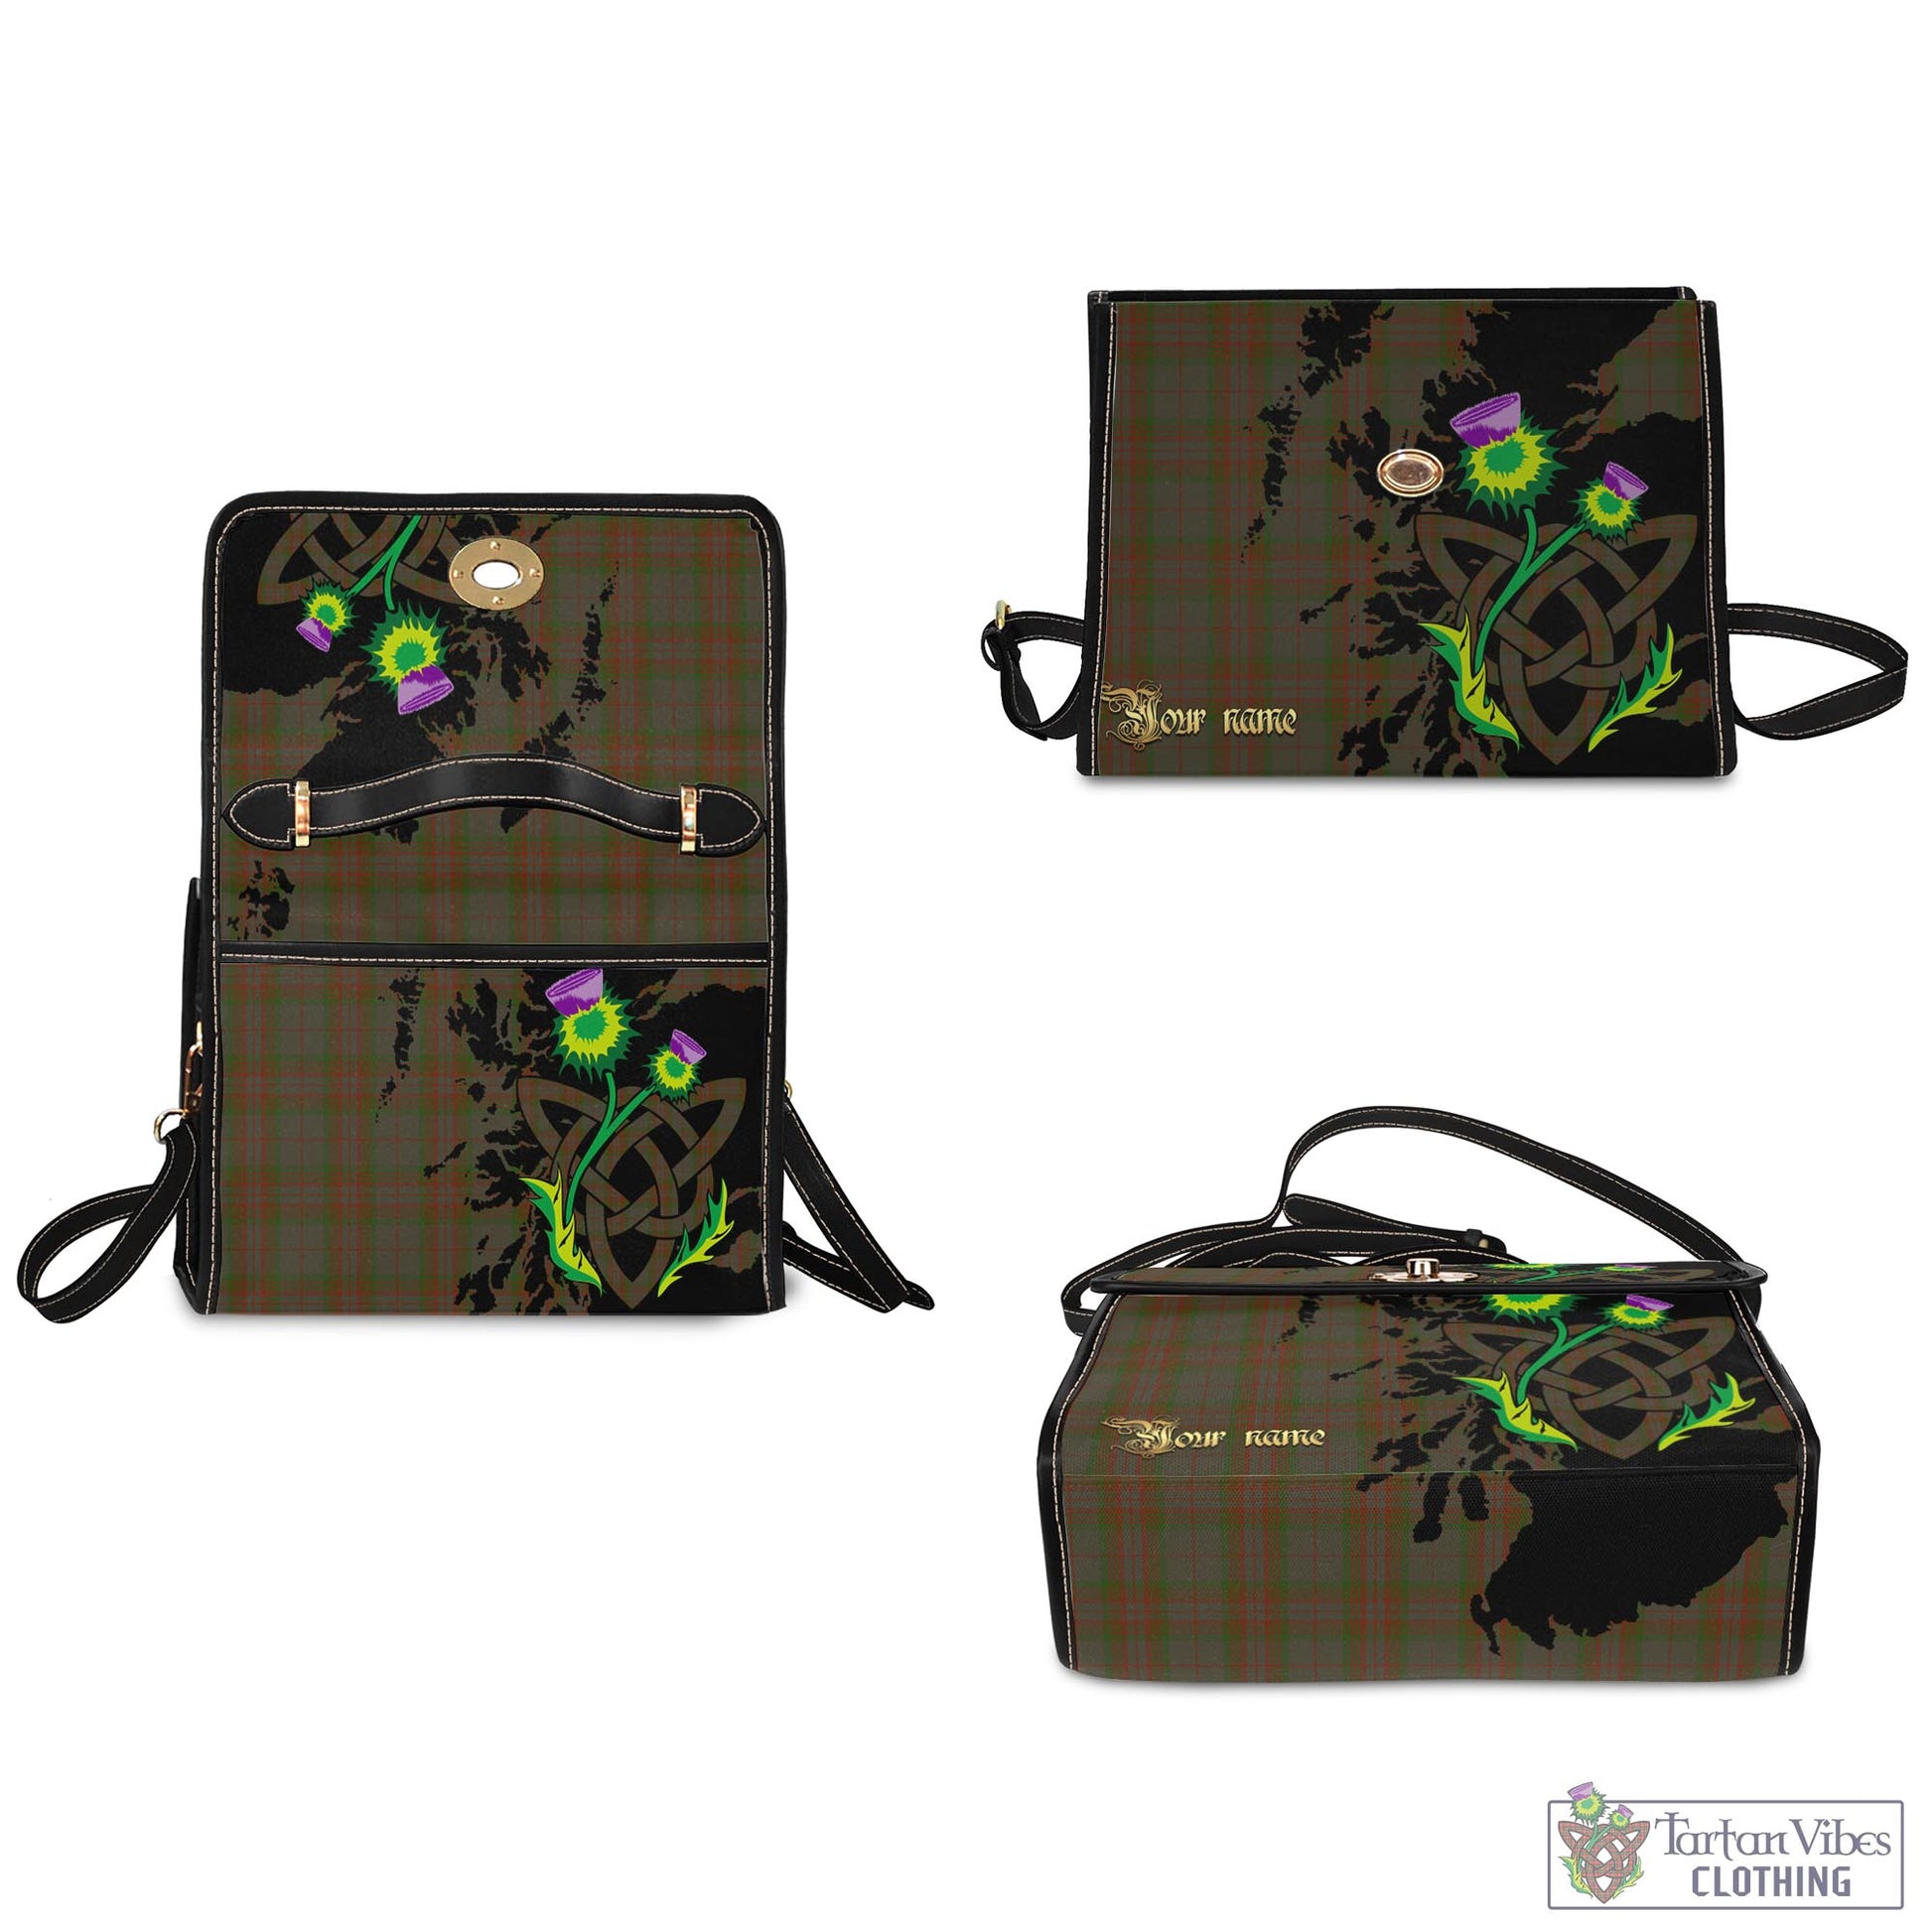 Tartan Vibes Clothing Gray Tartan Waterproof Canvas Bag with Scotland Map and Thistle Celtic Accents